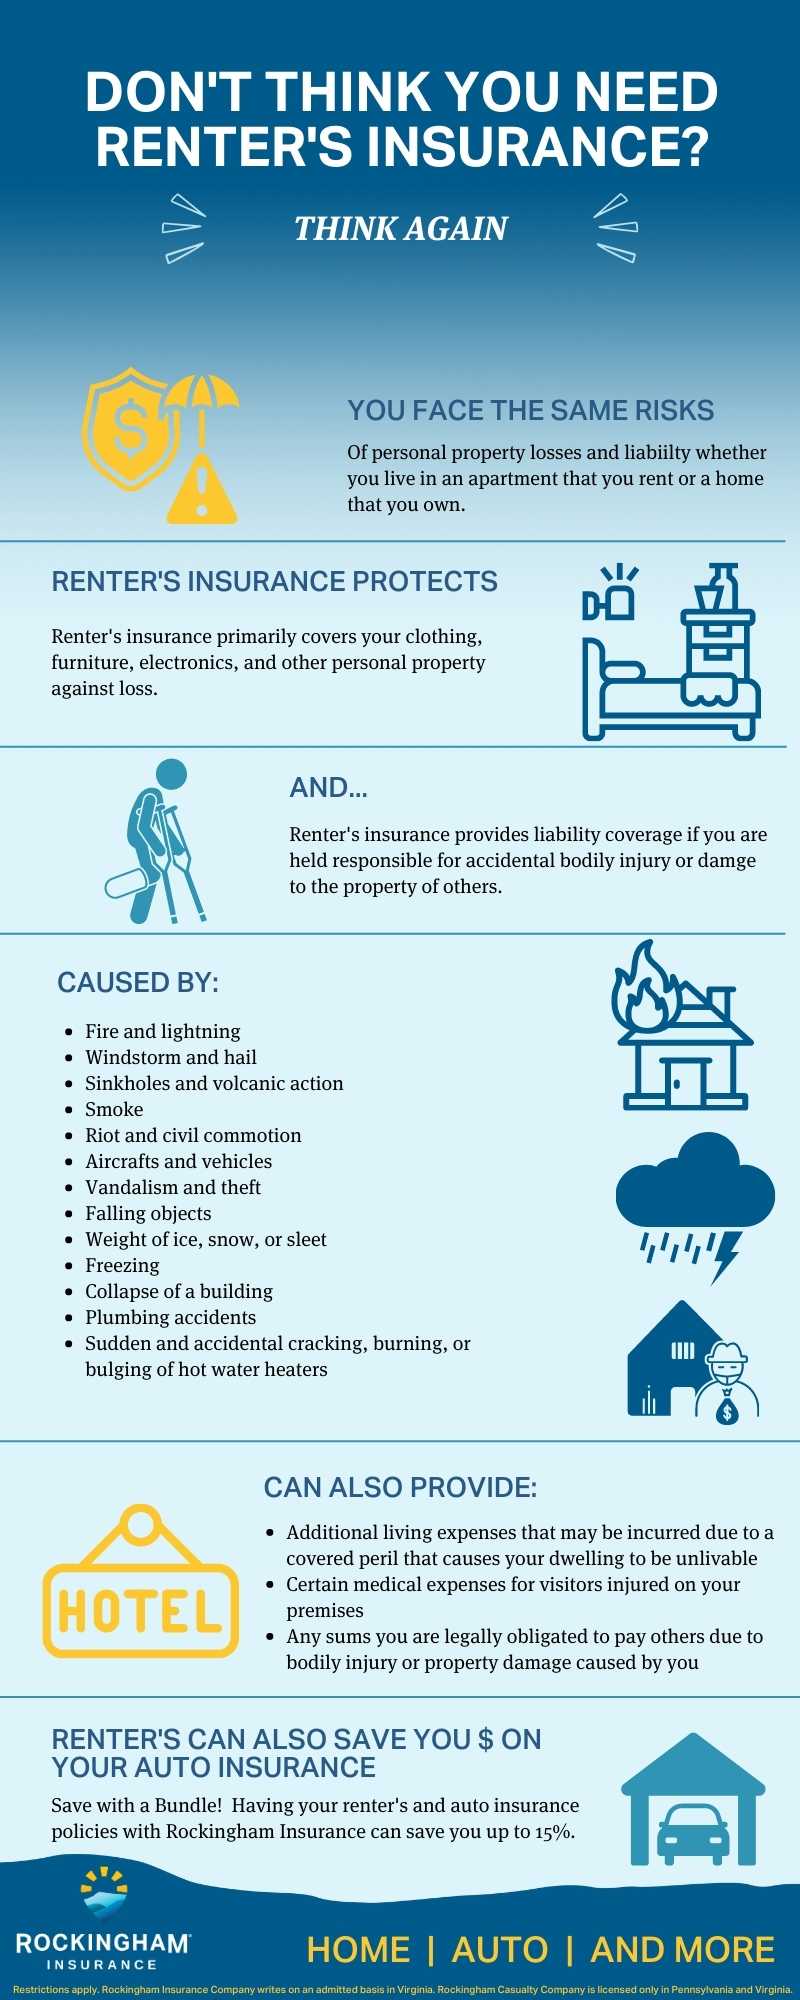 https://rockingham.insure/wp-content/uploads/2023/03/Dont-think-you-need-Renters-Insurance-Blog-Infographic-02-23.jpg